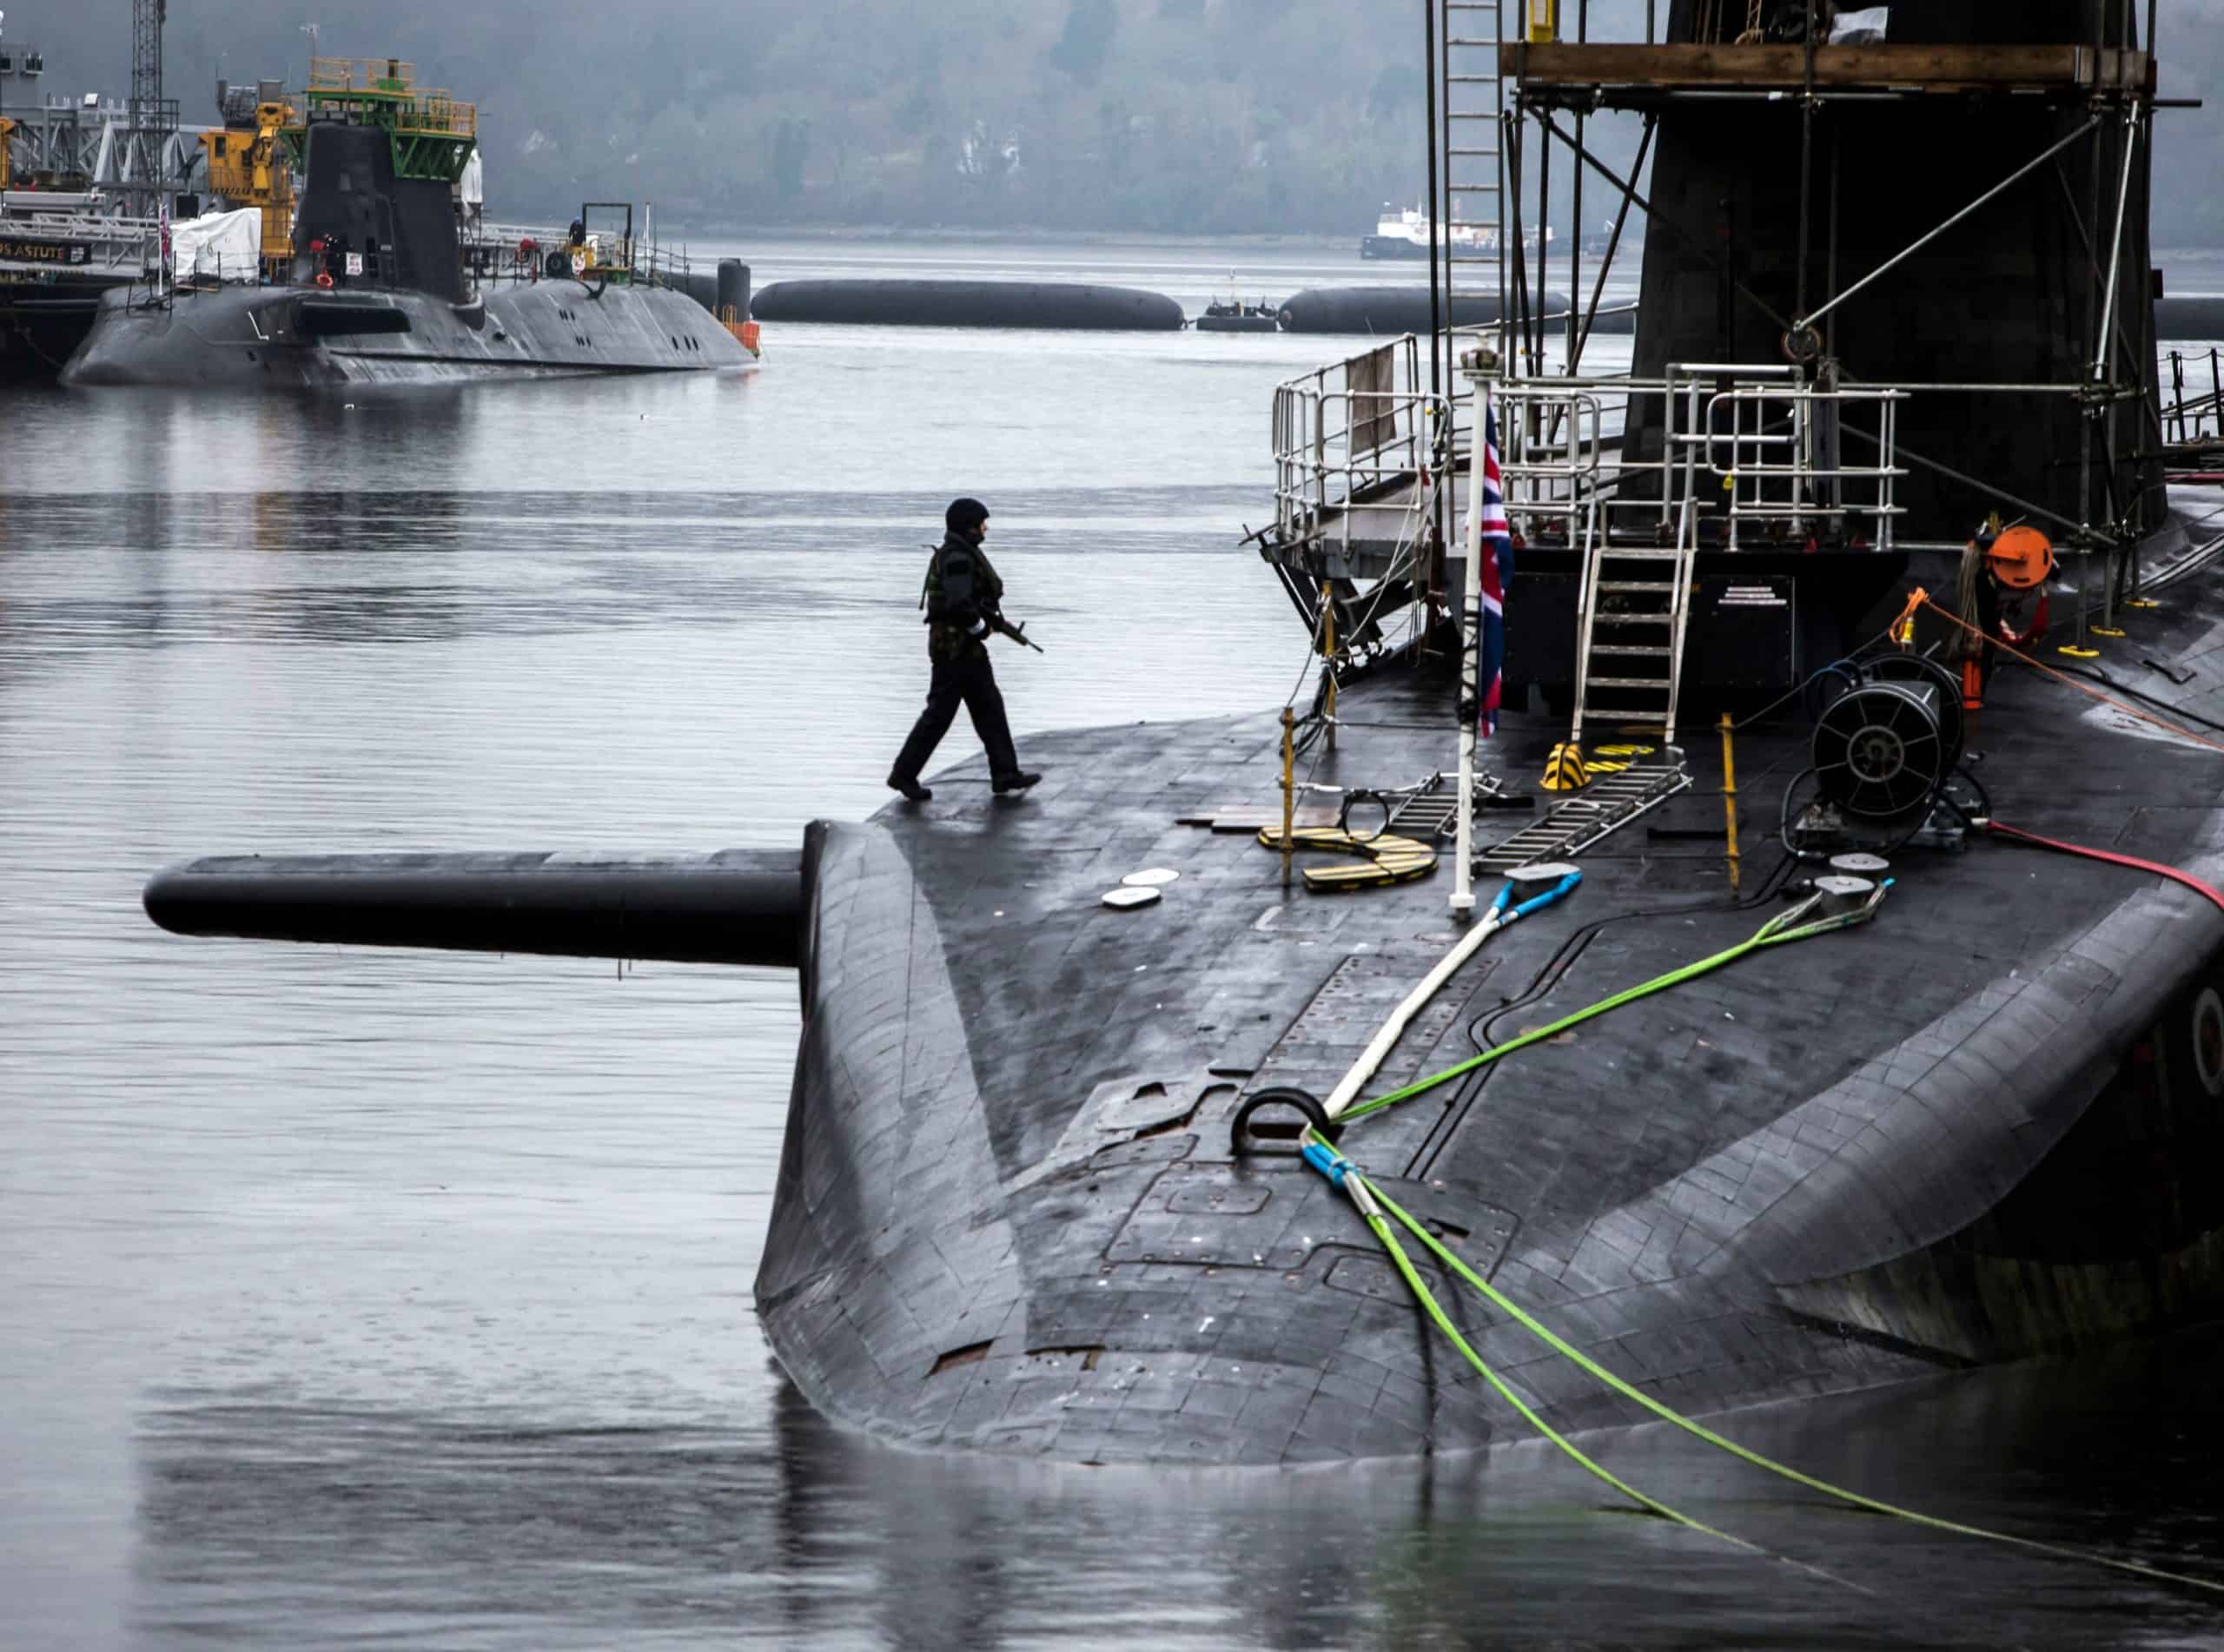 Trident ‘could be moved abroad’ if Scotland quits UK